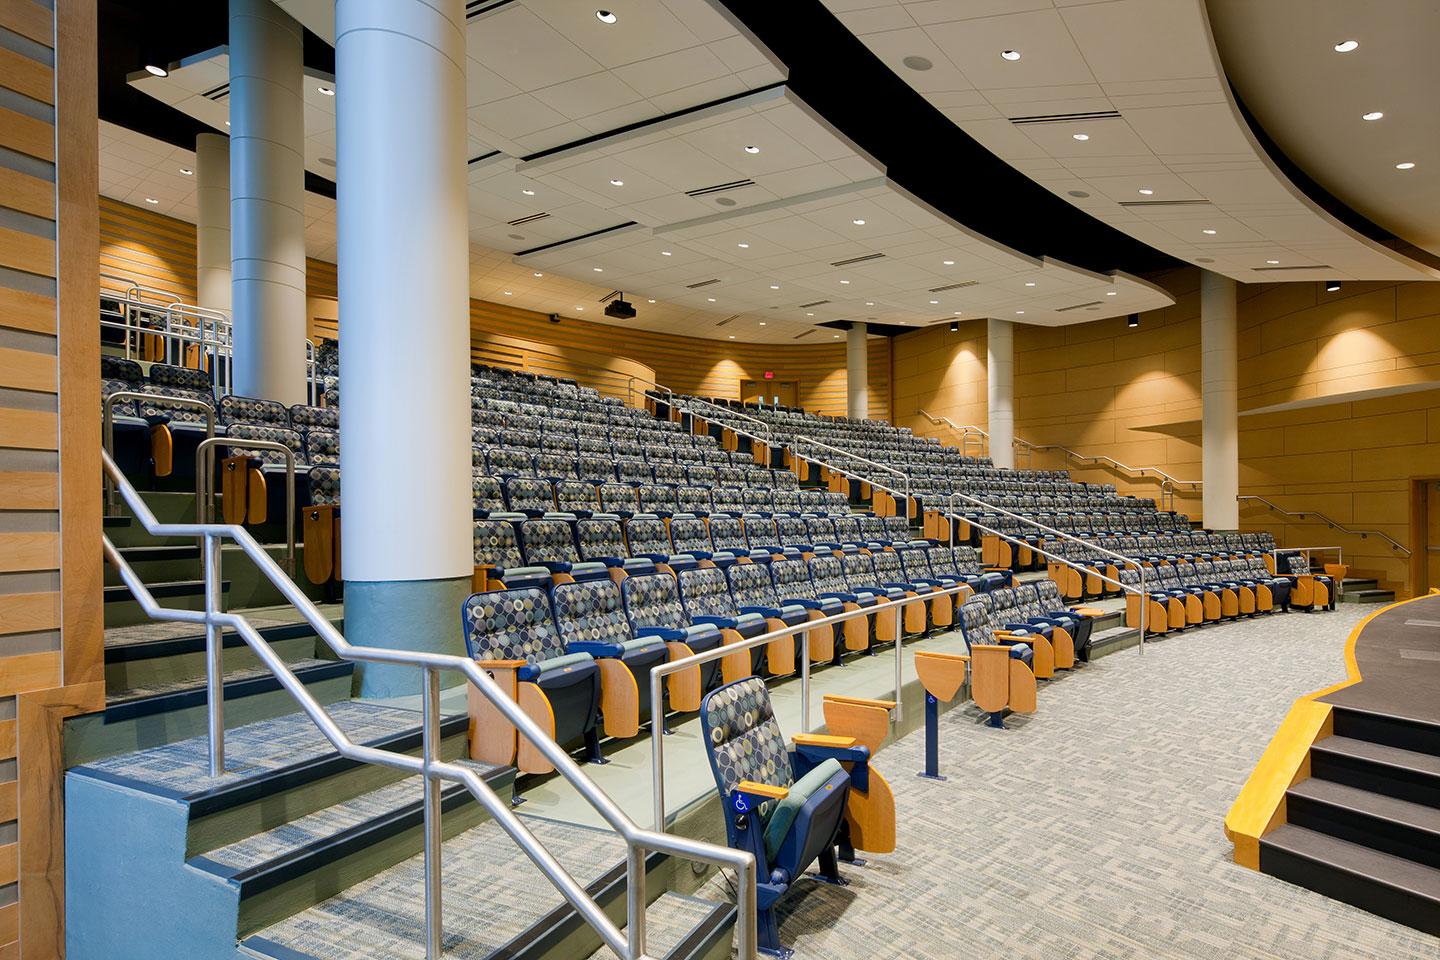 Kent State University Trumbull Campus Lecture Hall Renovation + Expansion